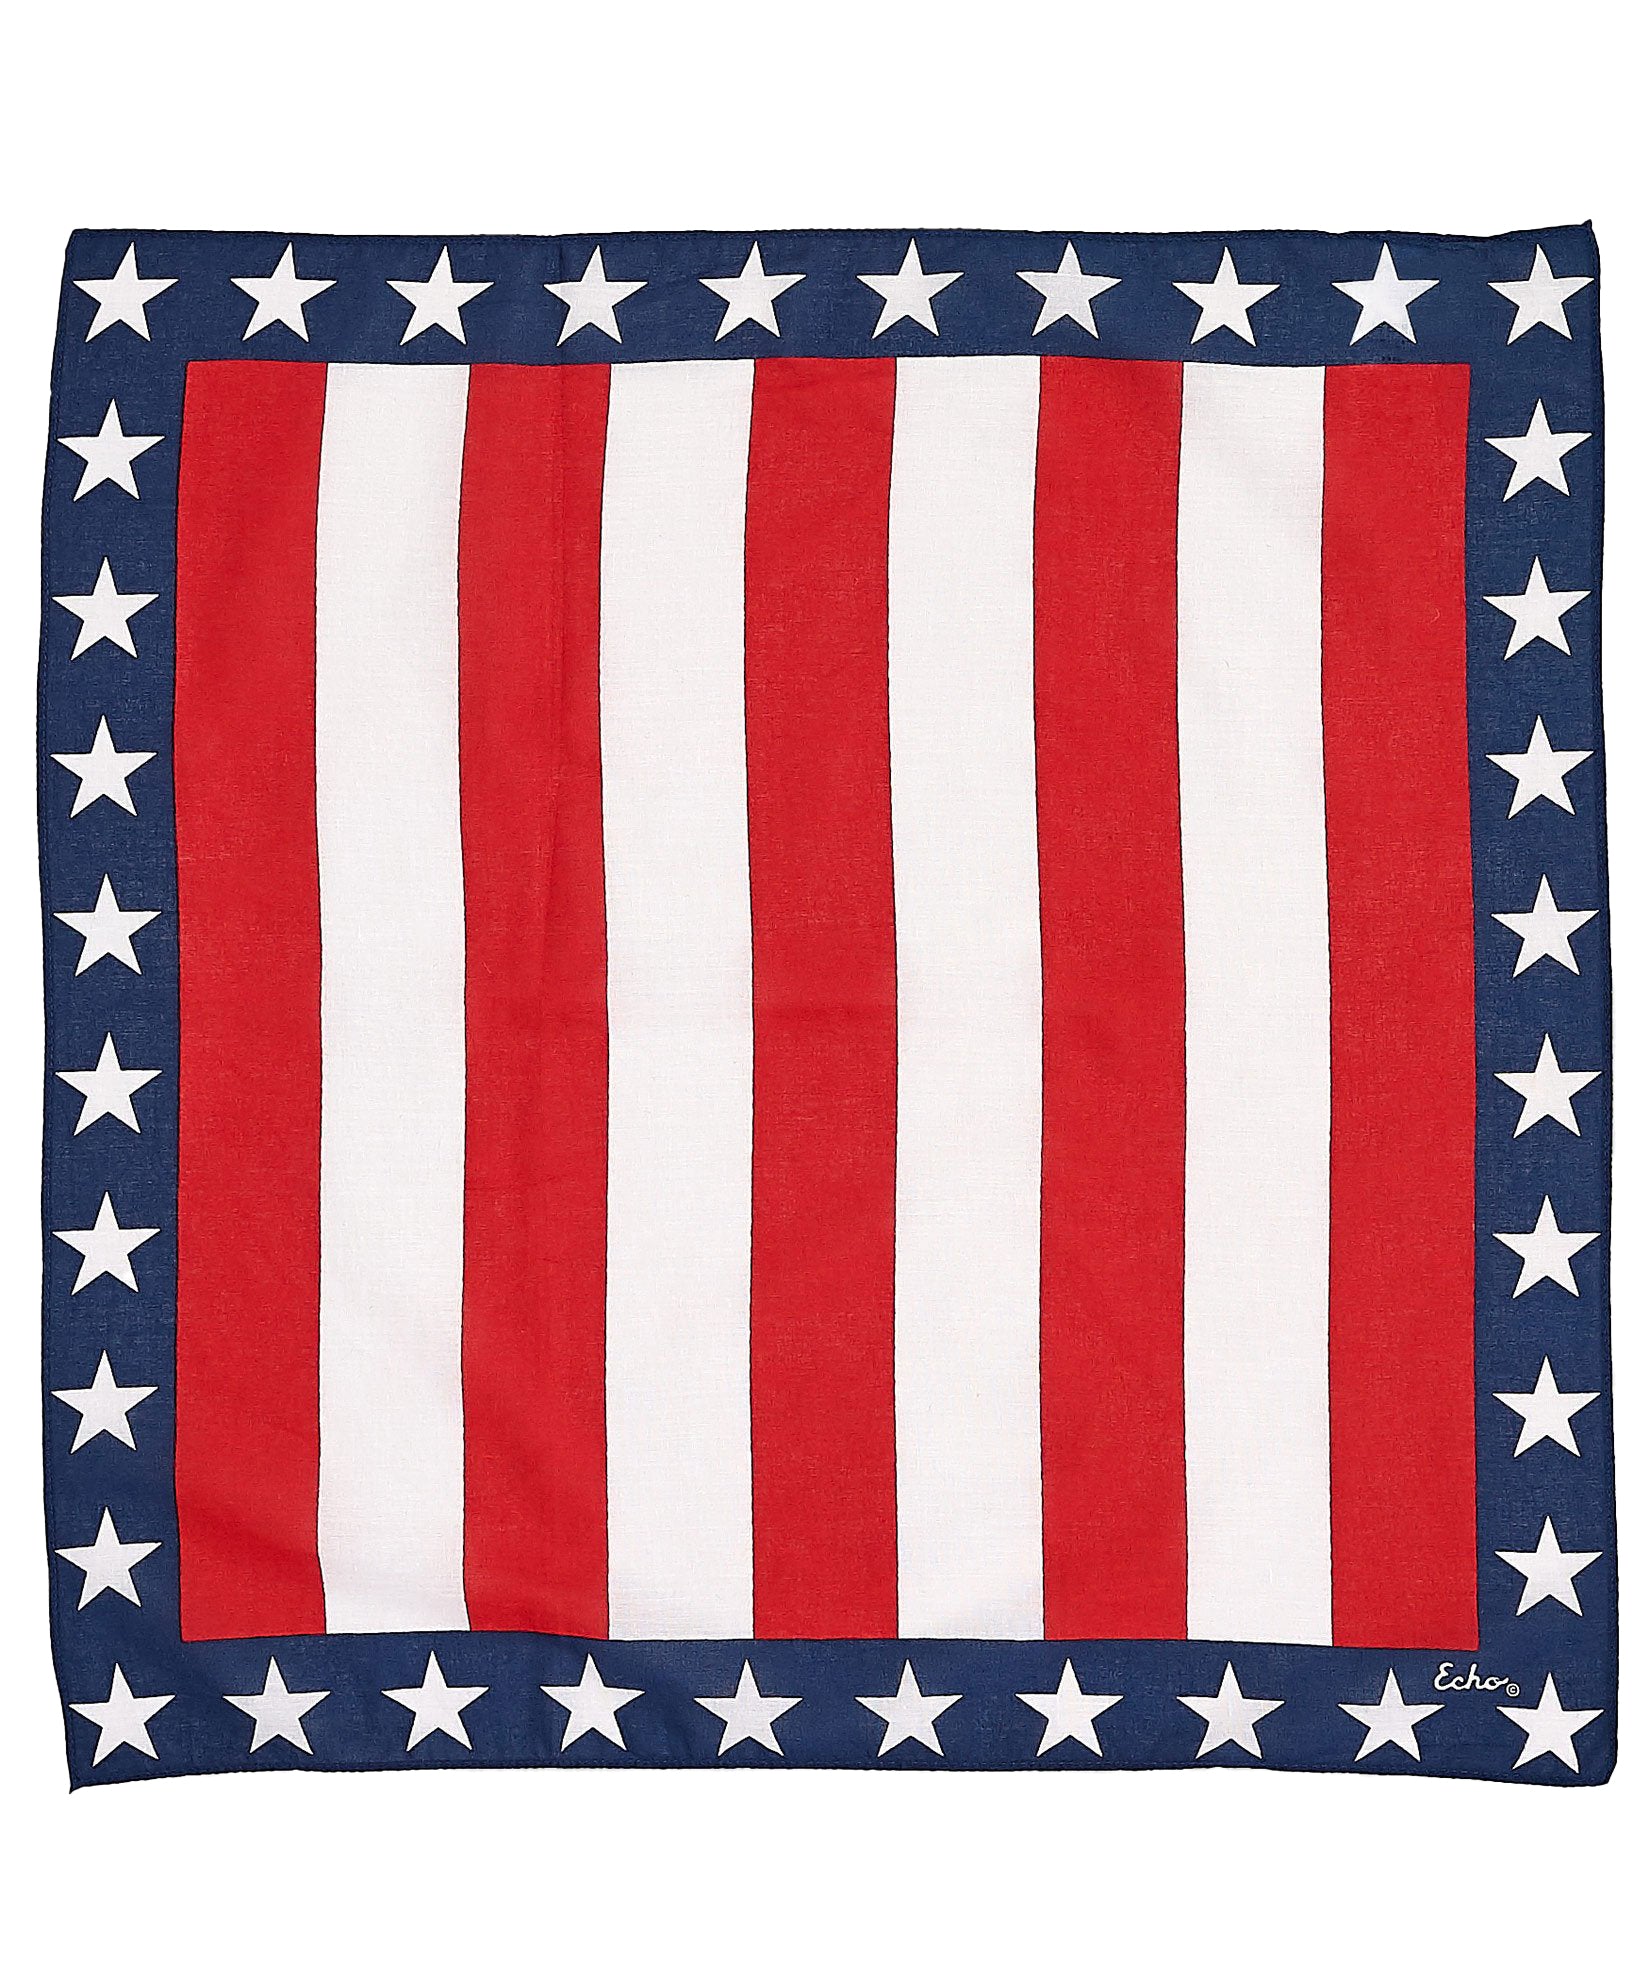 Stars And Stripes Bandana in color Red